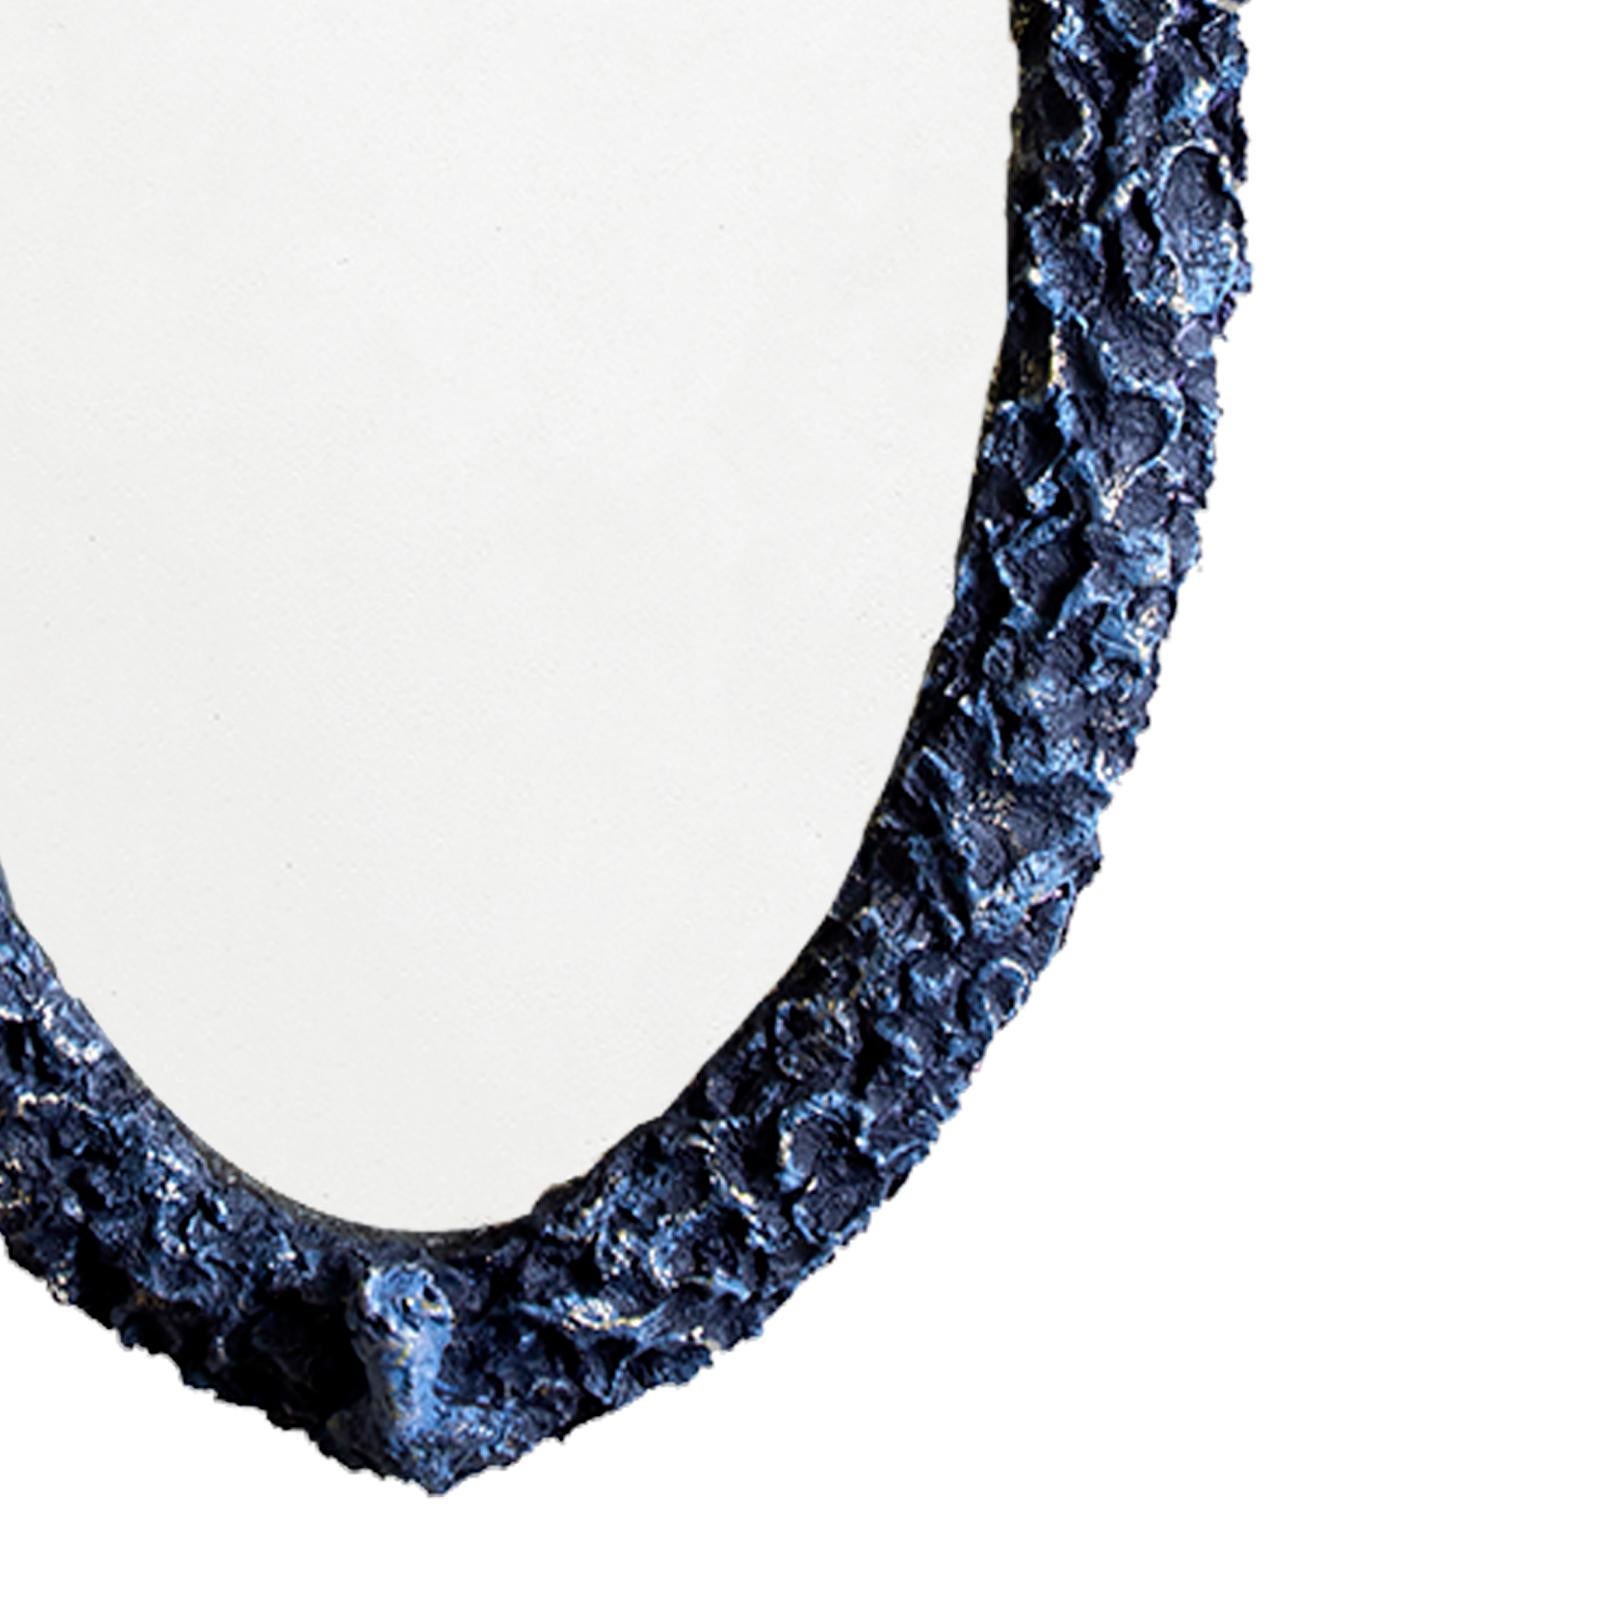 Margit Wittig's classical yet curious mirrors are filled with individuality.
With her artistic eye, Margit’s hand-sculpted, textural frames have a signature portrait head placed at the lowest point.
Each mirror is cast, applying multiple layers of